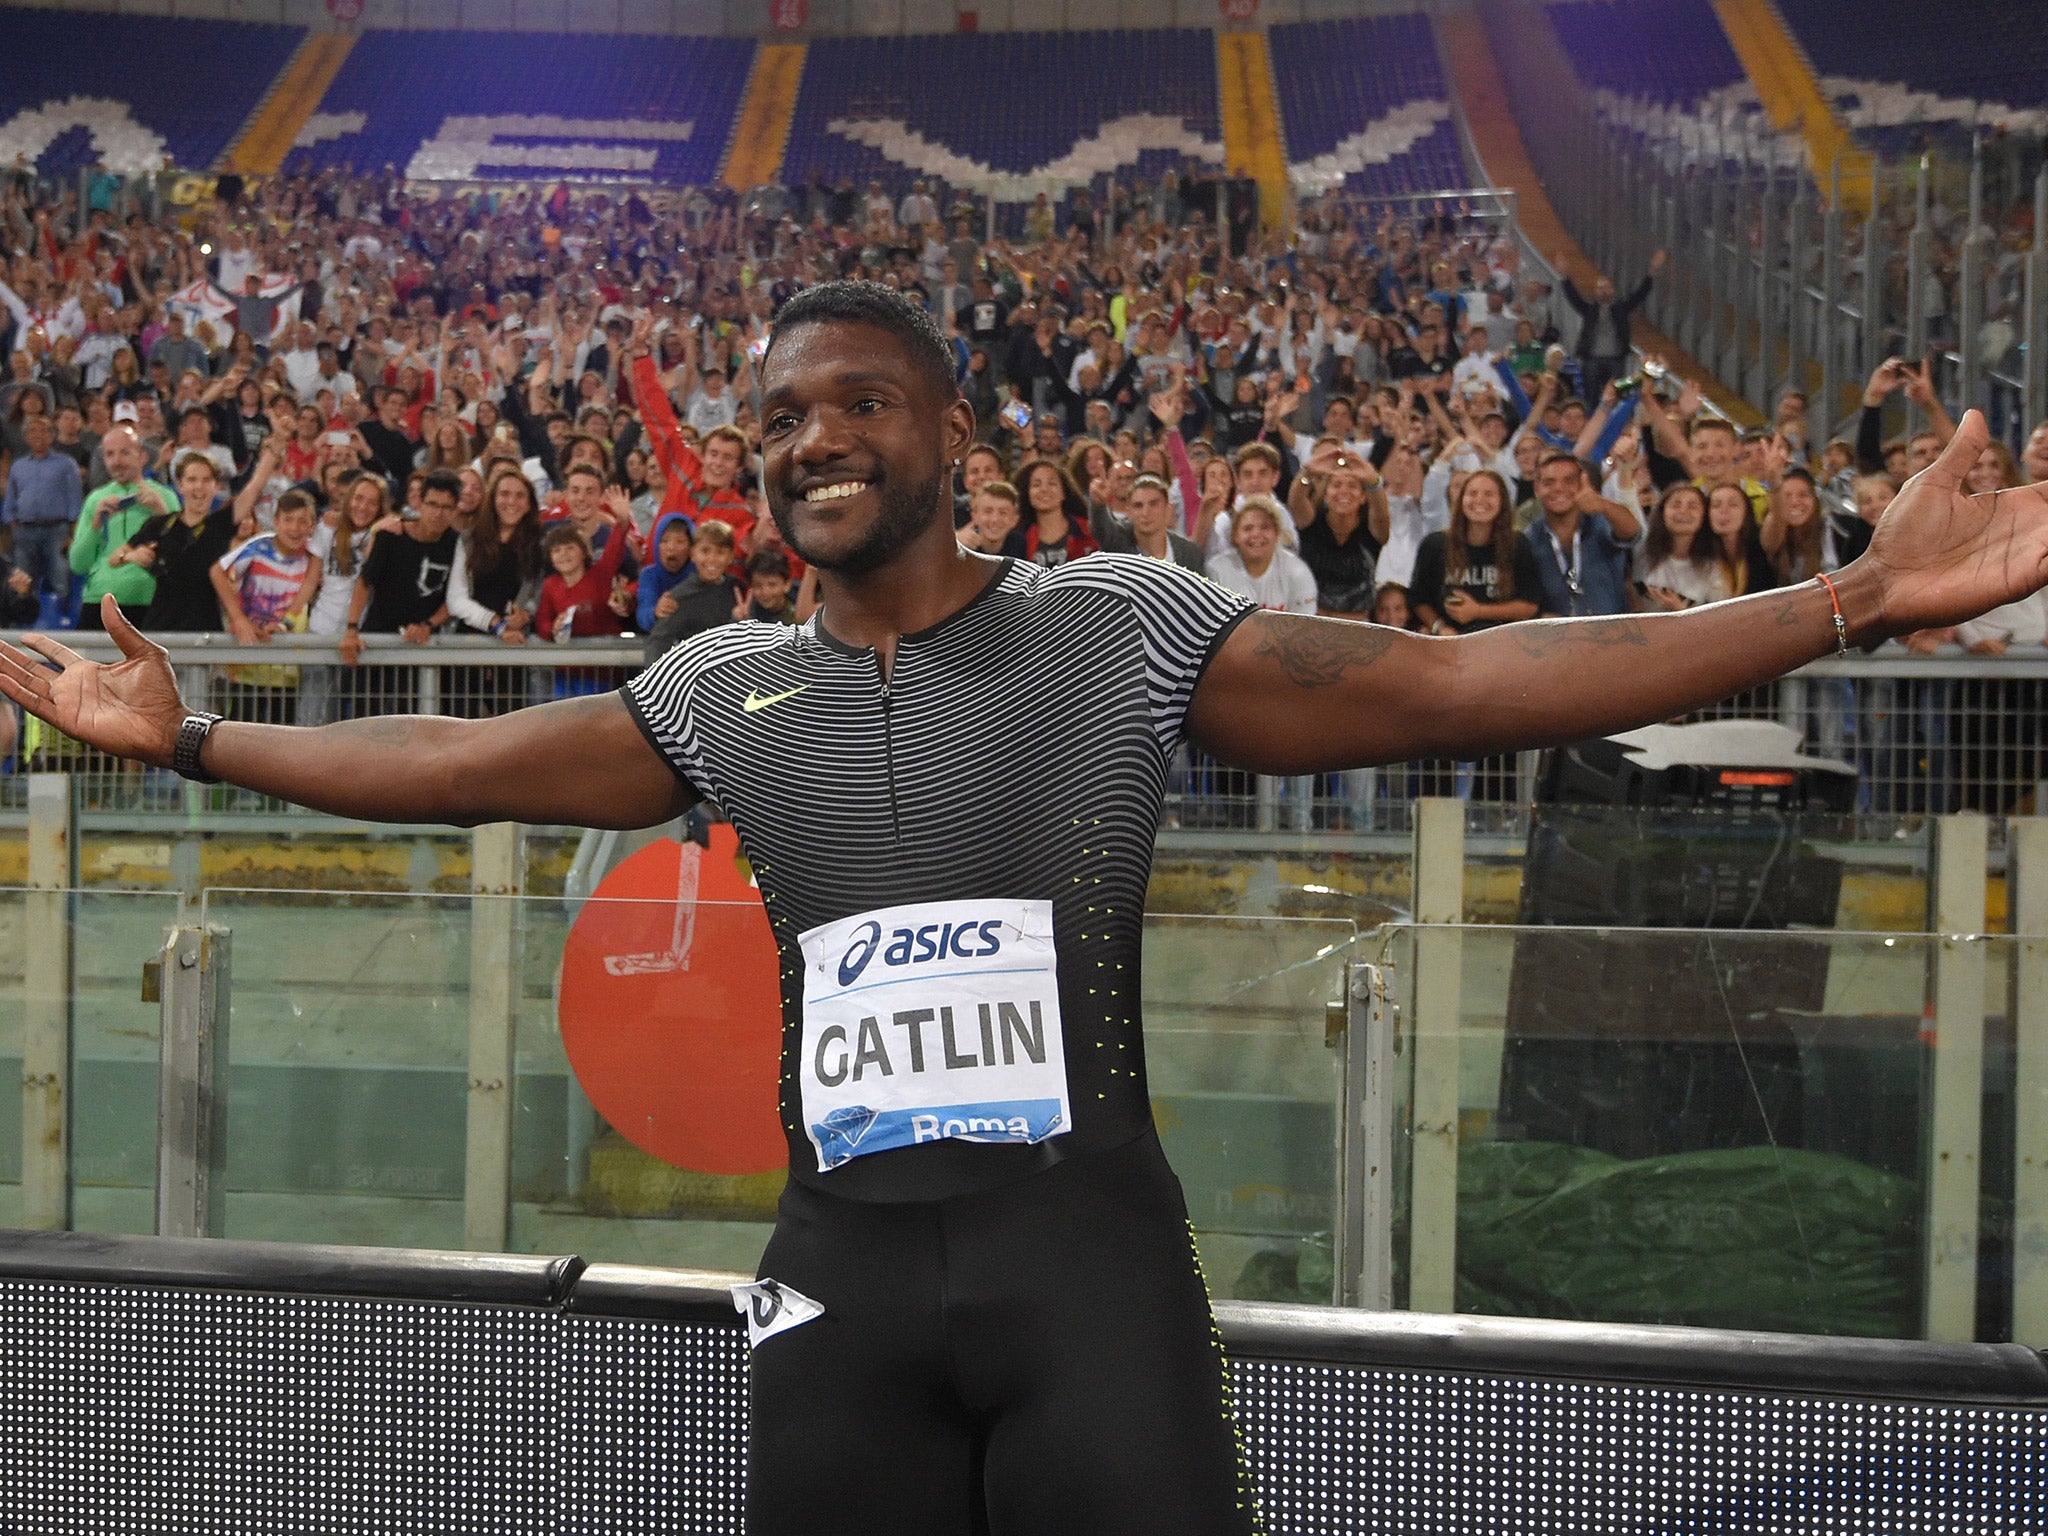 Justin Gatlin will compete in the 100m at the Rio Olympic Games